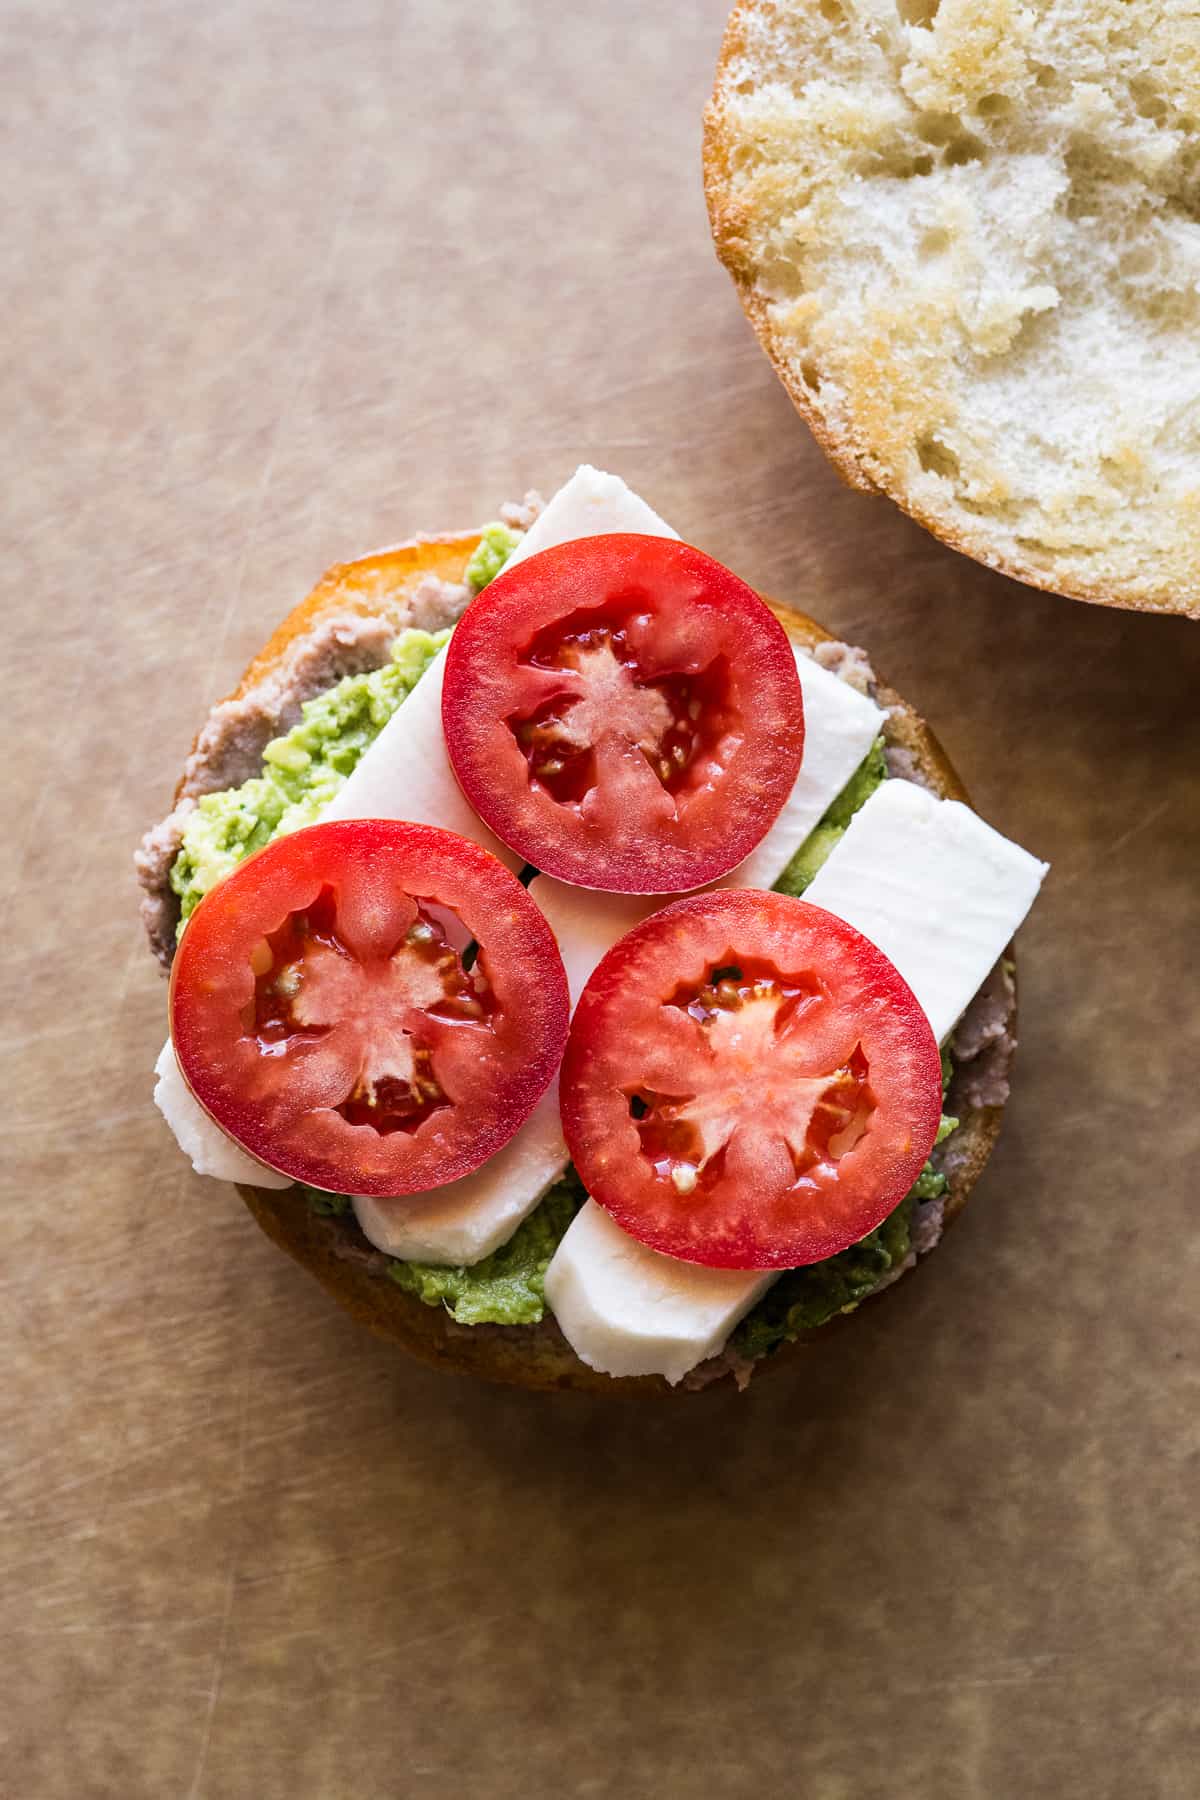 Tomatoes, queso fresco, refried beans and guacamole smeared on a telera roll.